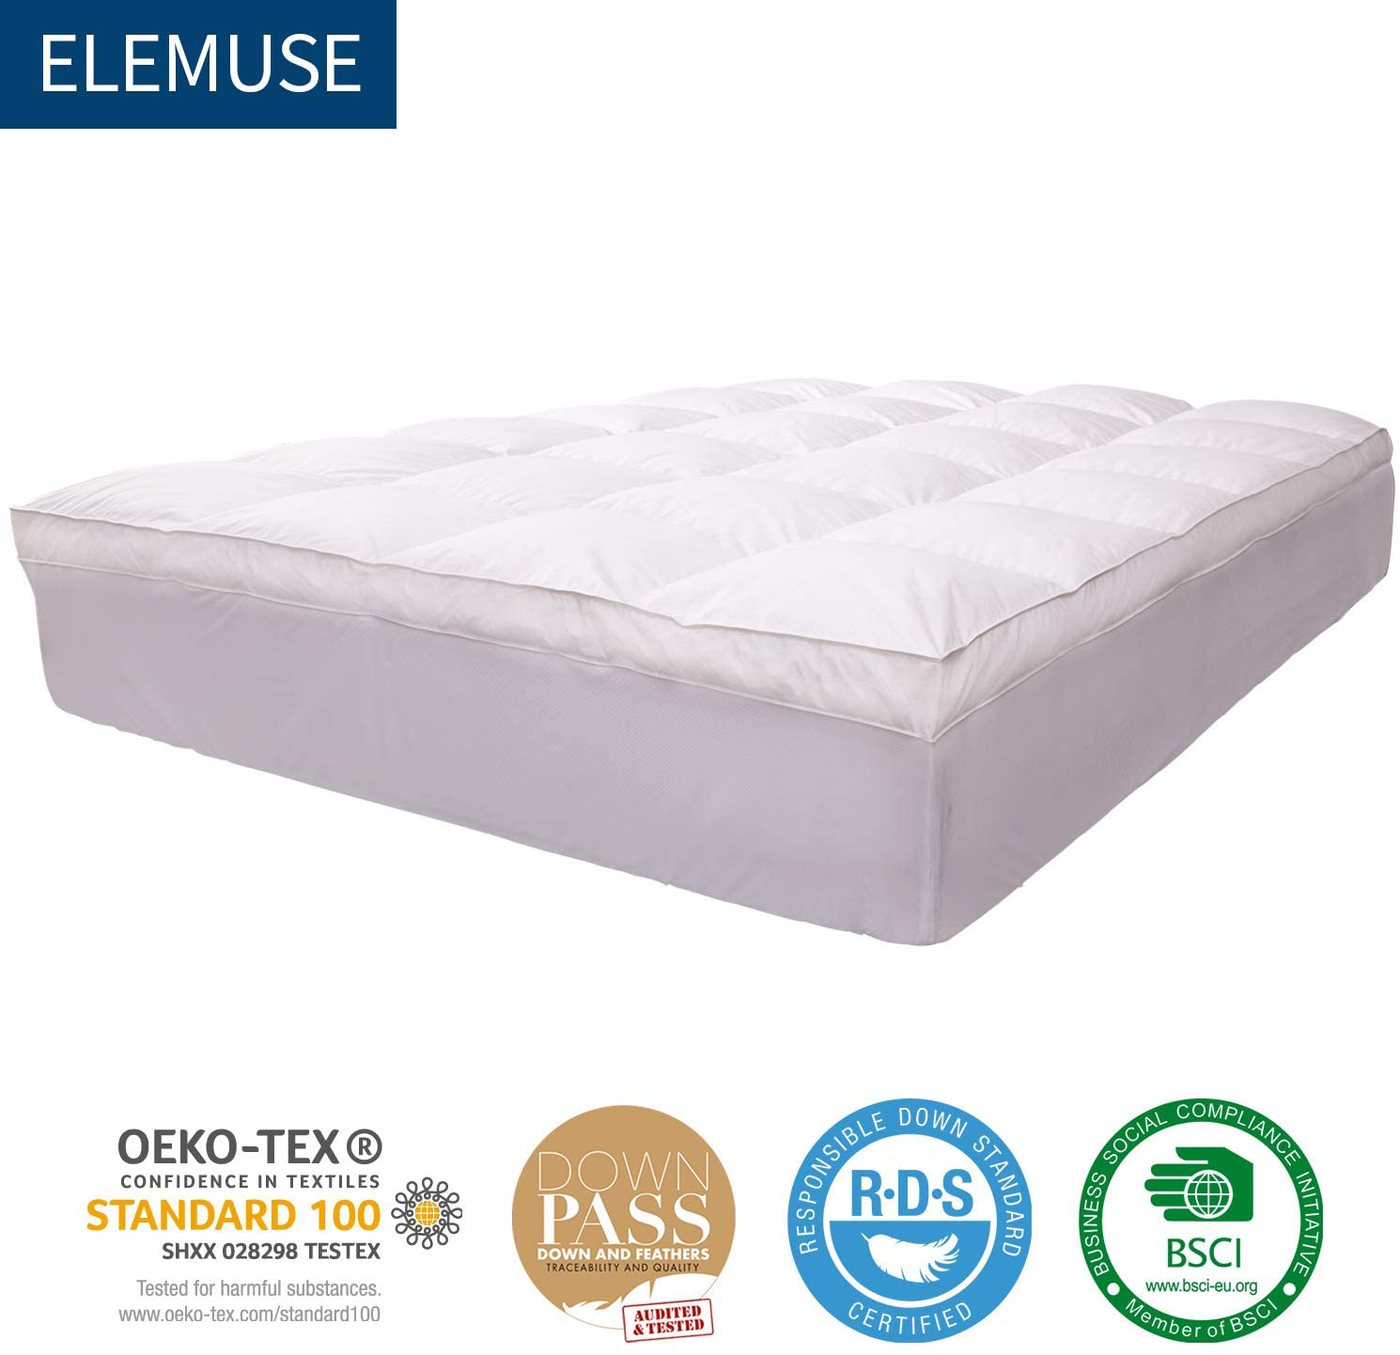 ELEMUSE King Mattress Topper, Extra Thick Mattress Pad Cover, Plush Quilted Pillowtop with 8-21 Inch Deep Pocket, Soft Down Alternative Fill